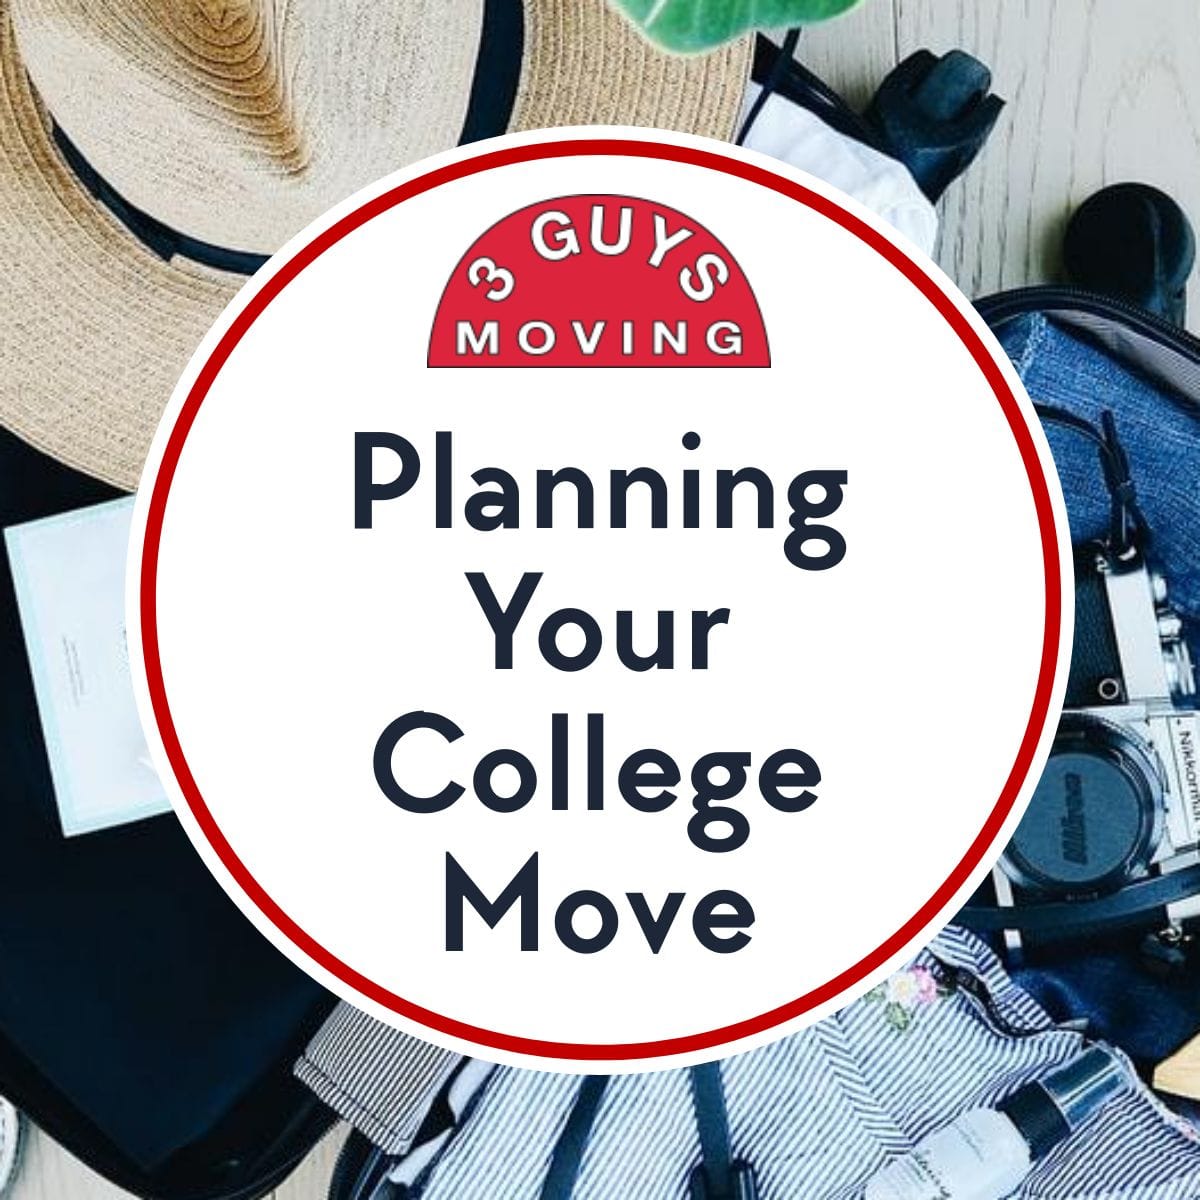 Planning Your College Move - Planning Your College Move